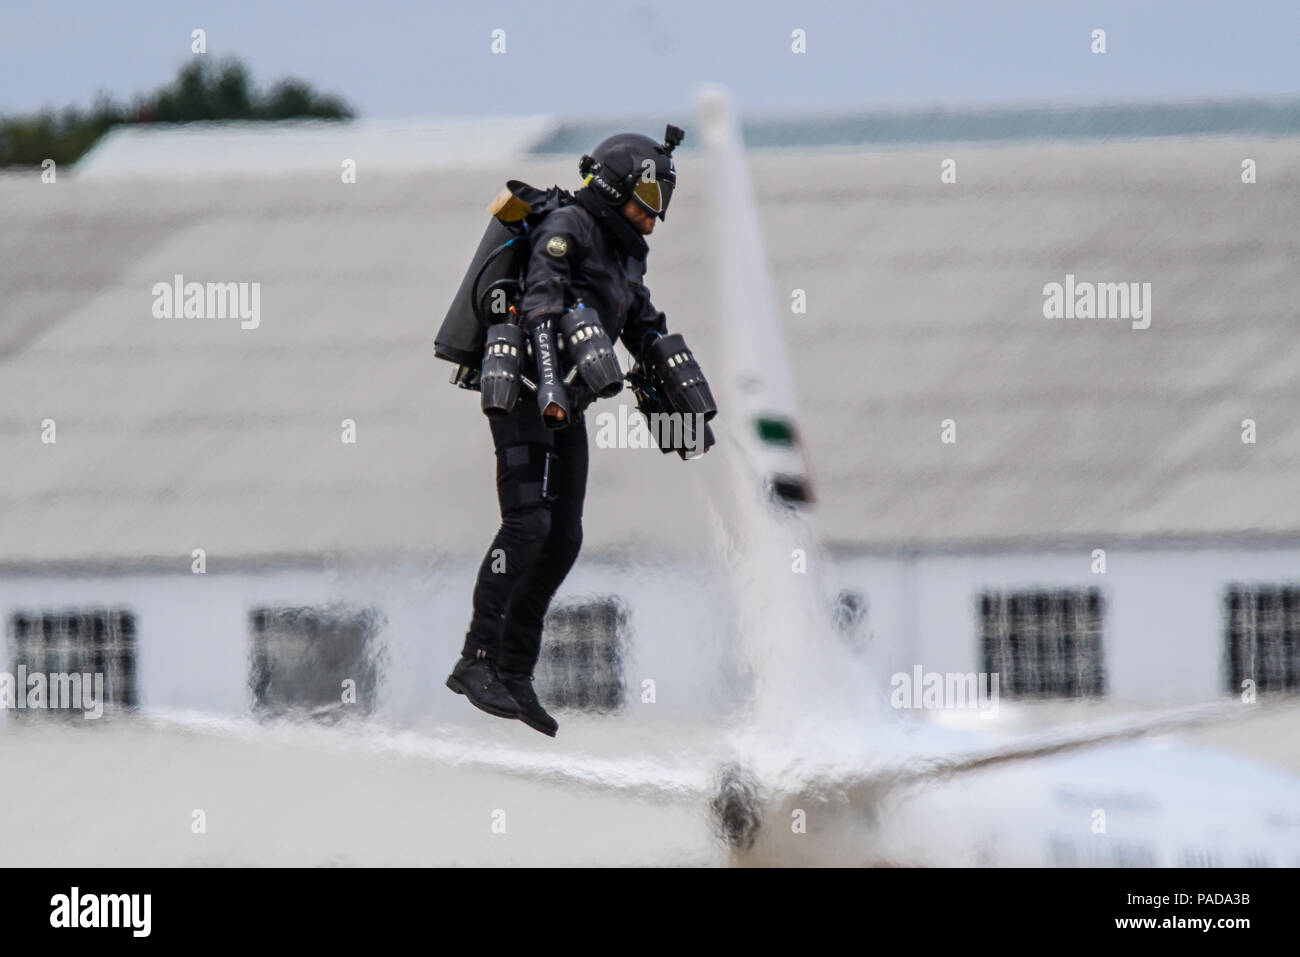 Richard Browning in Gravity Iron Man Jet Suit flying at the Farnborough International Airshow, FIA 2018. Jet man personal flight suit named Daedalus Stock Photo